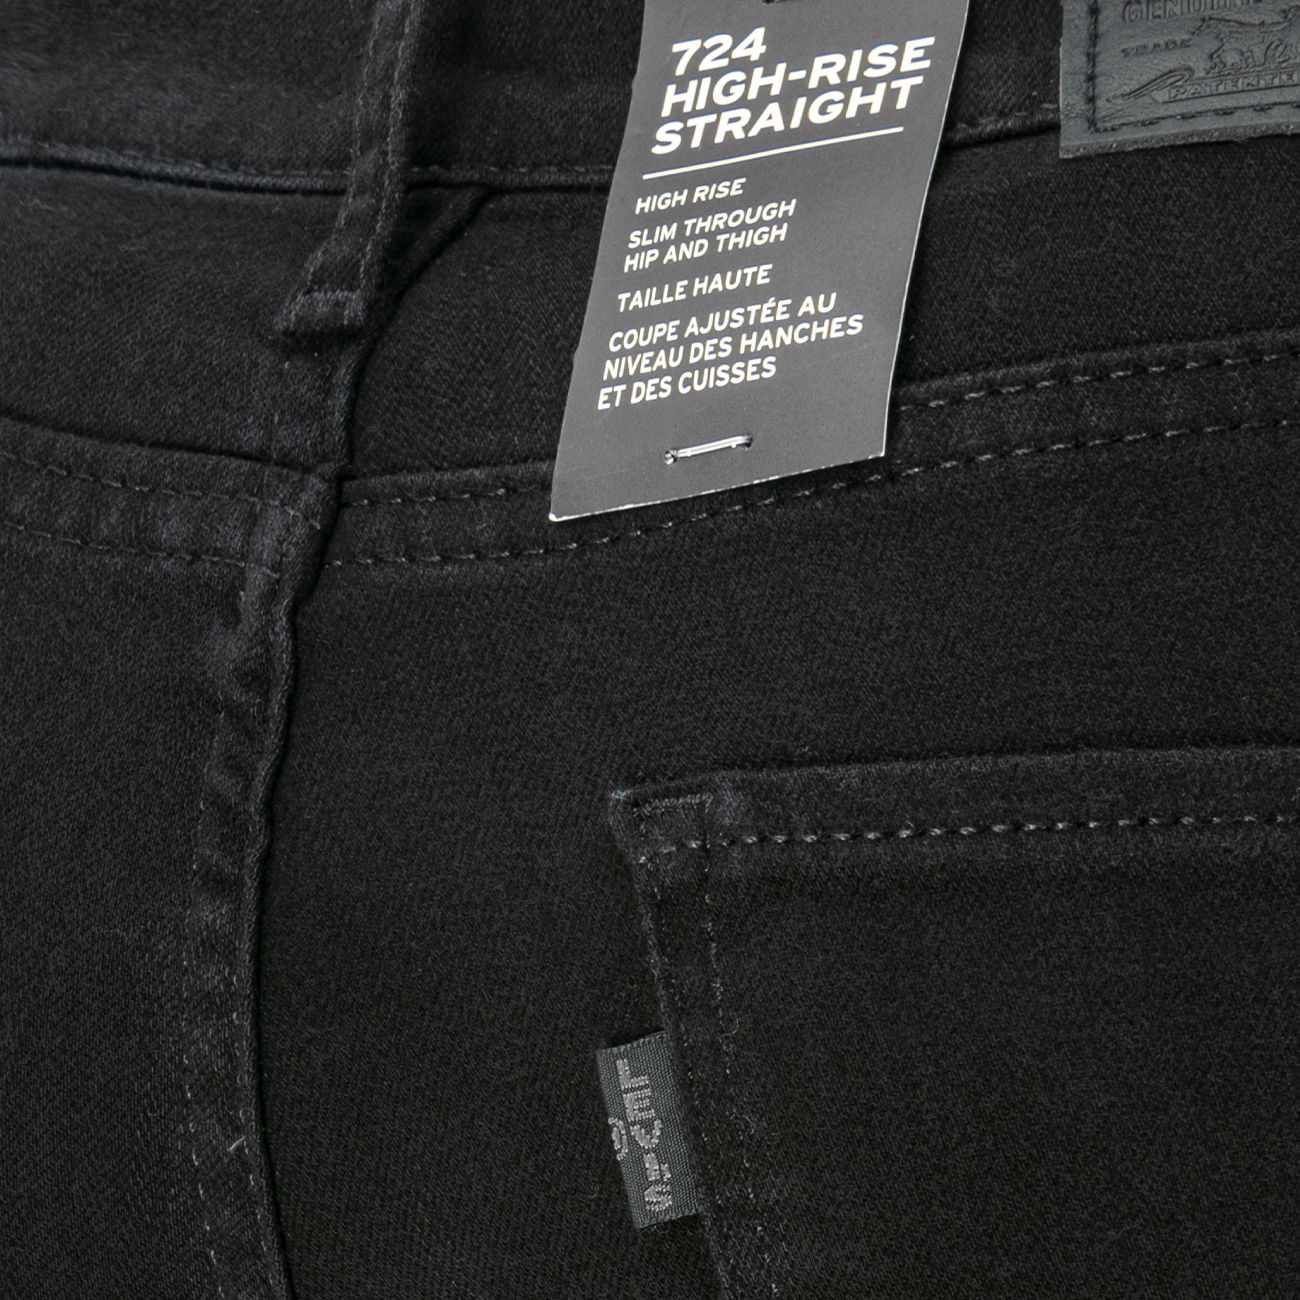 LEVIS 724 HIGH RISE STRAIGHT JEANS Woman Night Black